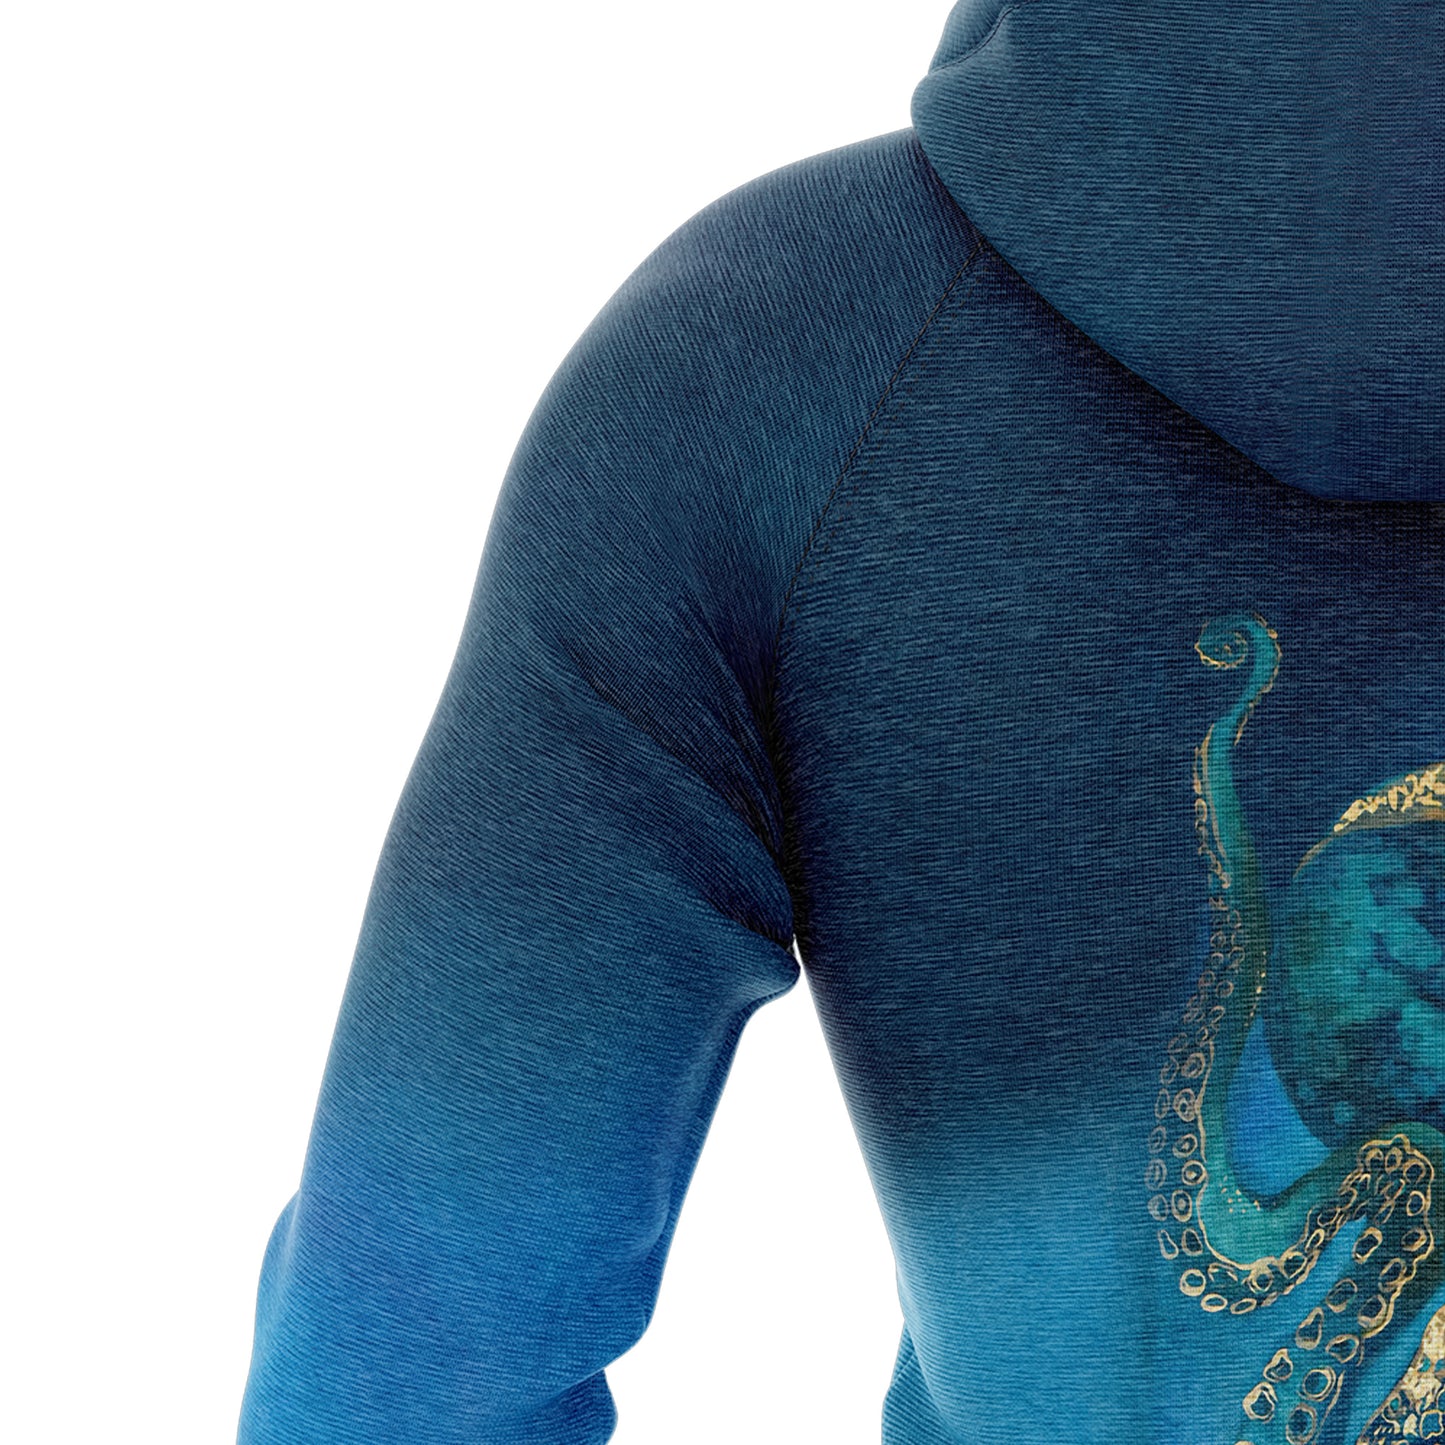 Amazing Octopus H7913 All Over Print Unisex Hoodie